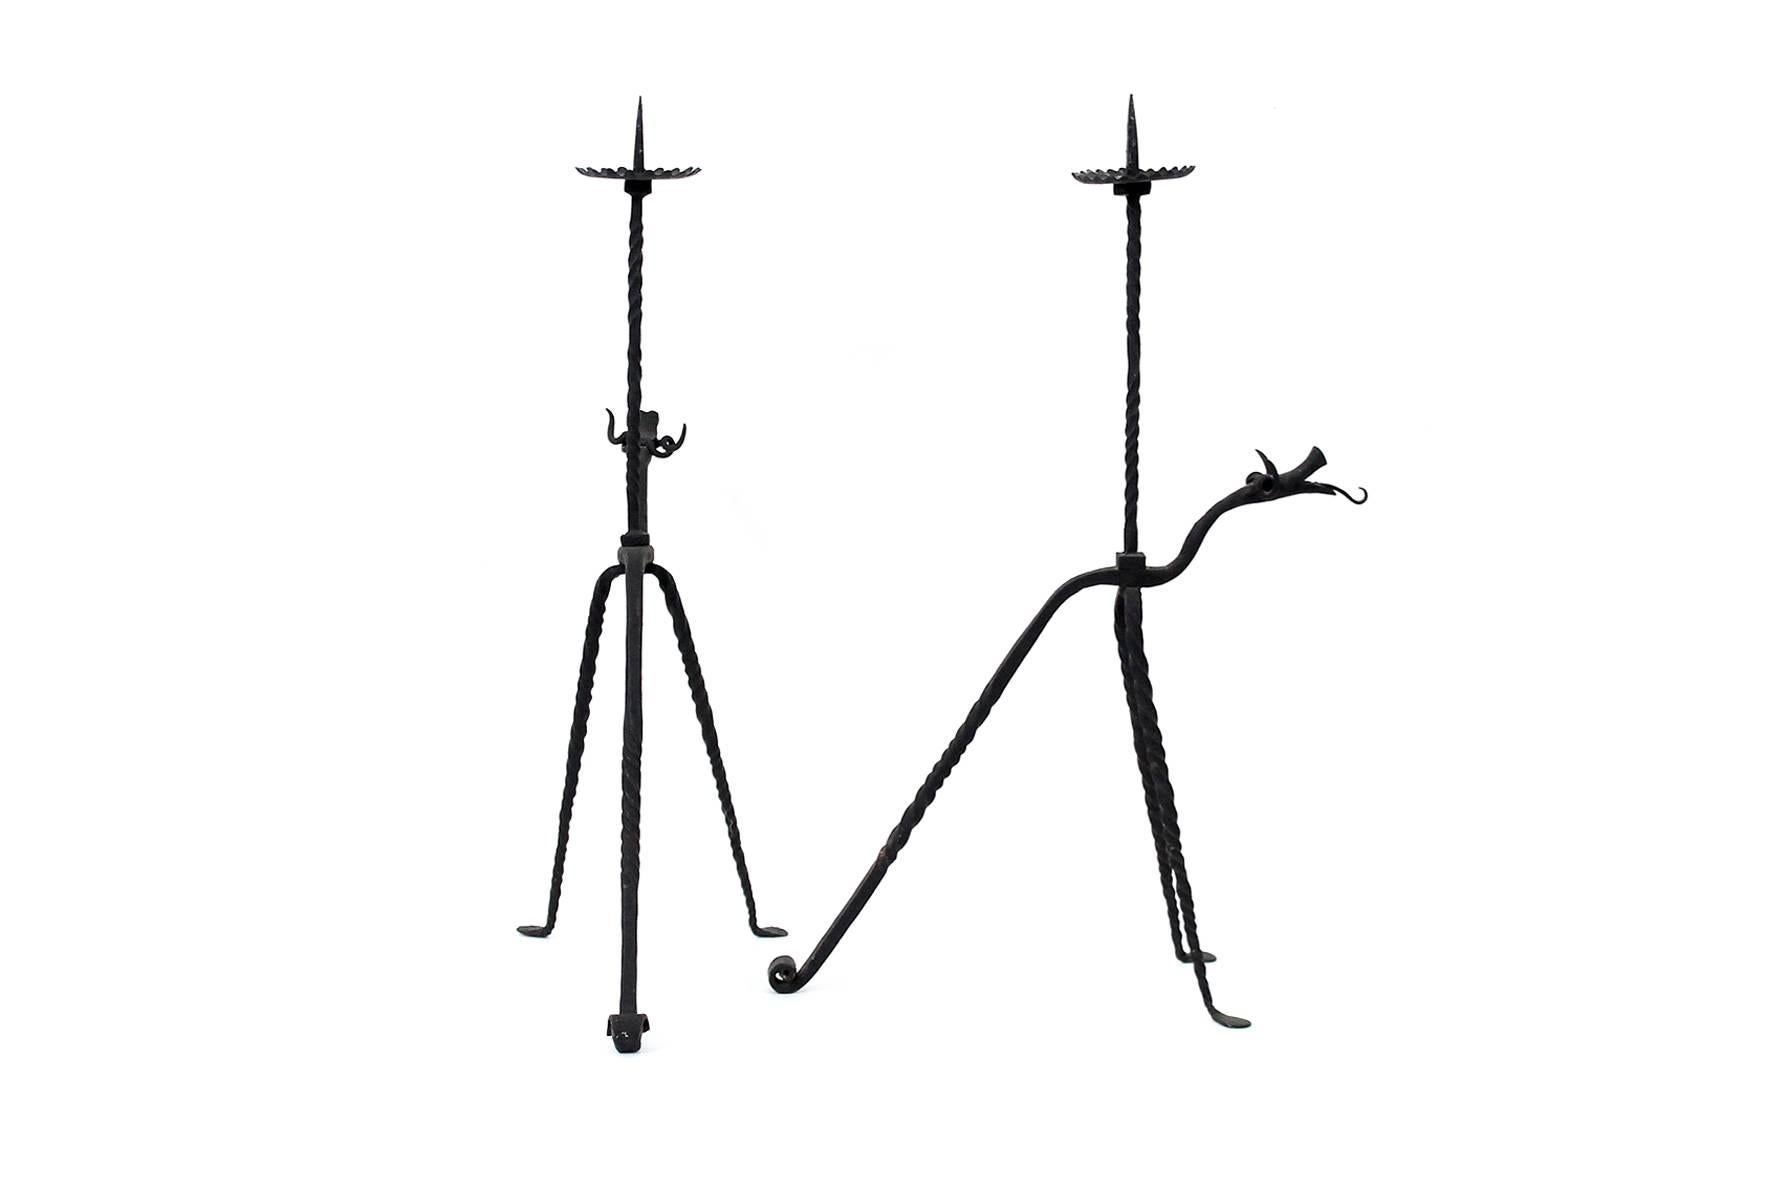 American Pair of Iron Candlesticks Attributed to Samuel Yellin